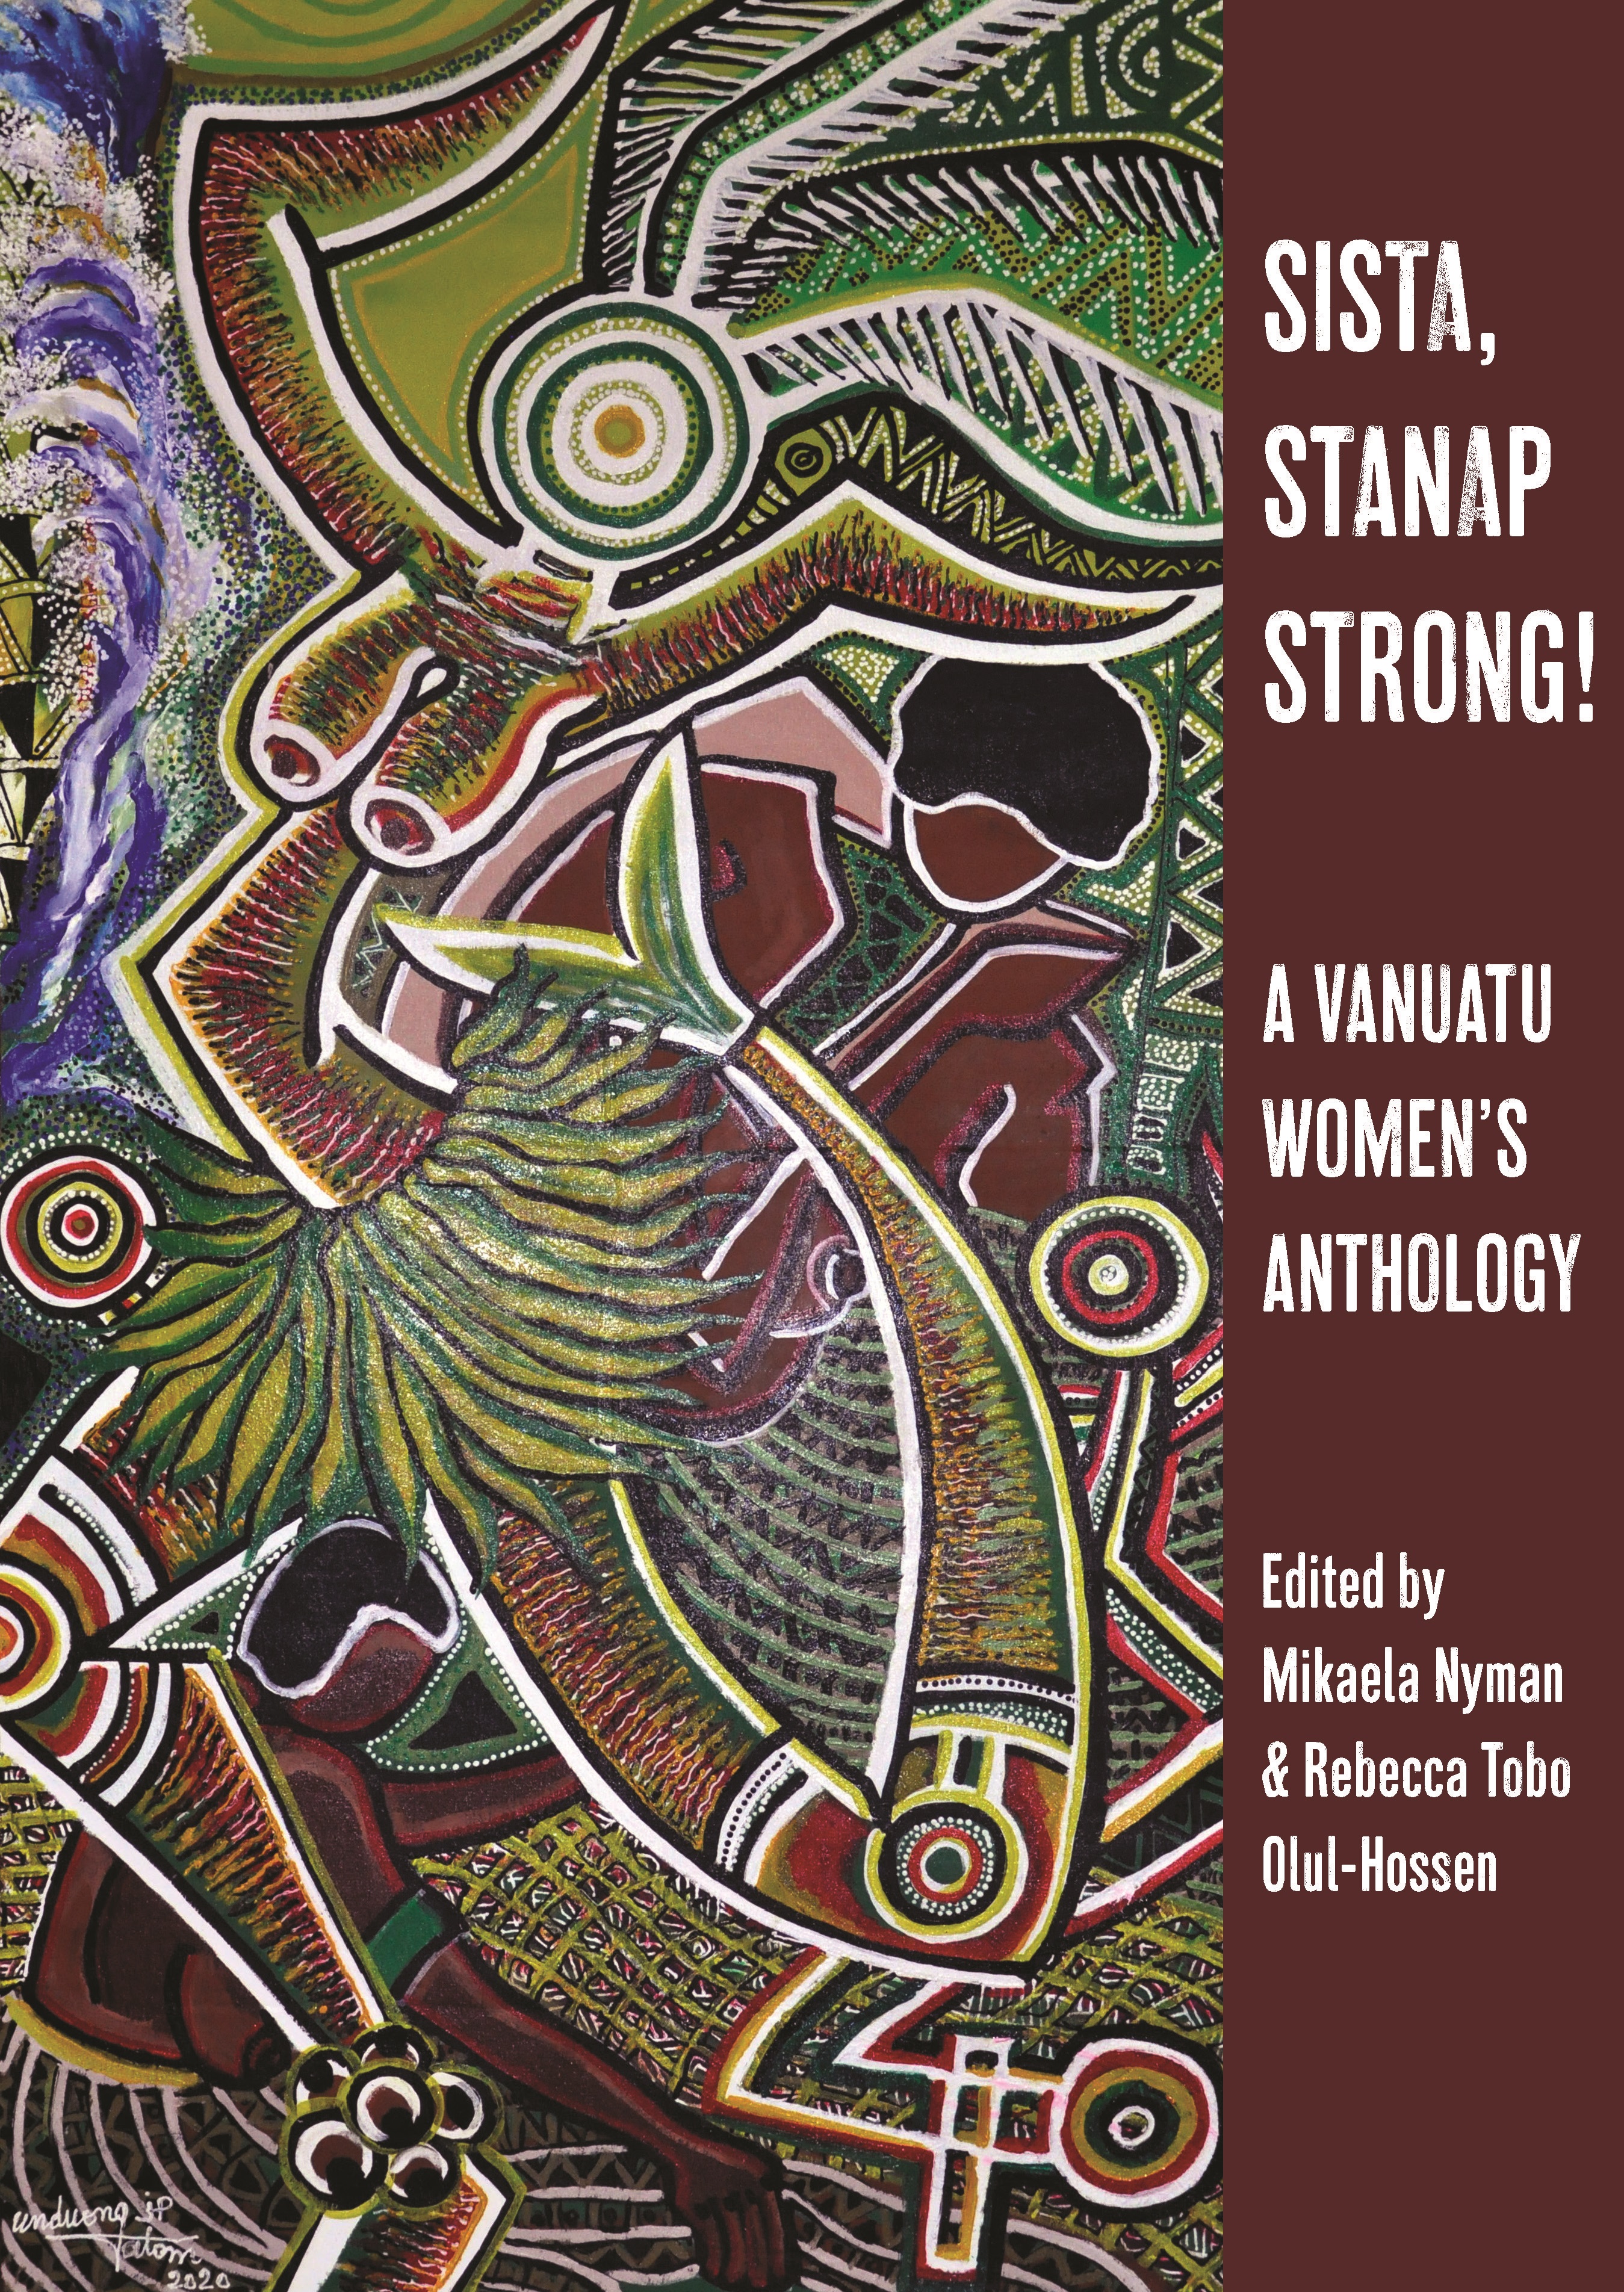 The cover of ‘Sista, Stanap strong! A Vanuatu Women’s Anthology’ featuring a colourful depiction of a woman in an indigenous style. Edited by Mikaela Nyman & Rebecca Tobo Olul-Hossen. 